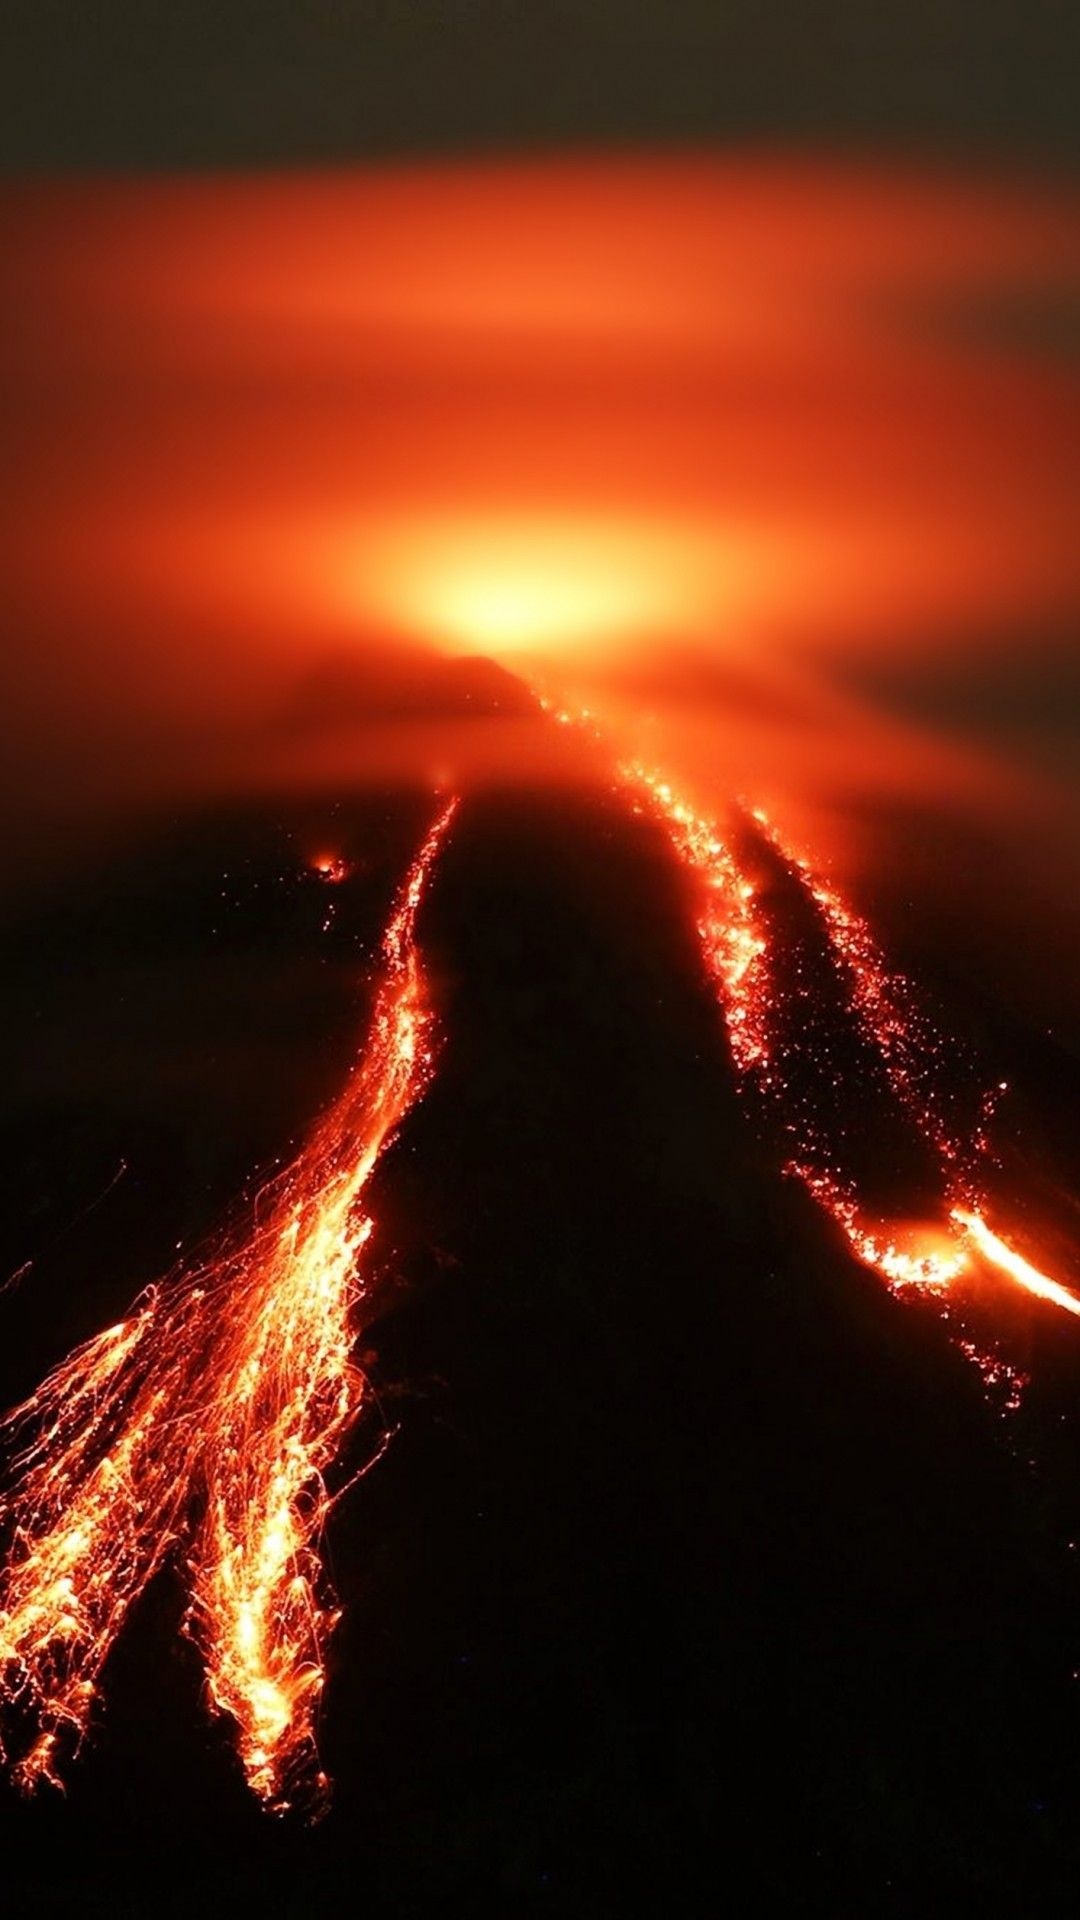 Volcanic eruption, Best background images, Raw power, Immersive landscapes, 1080x1920 Full HD Handy